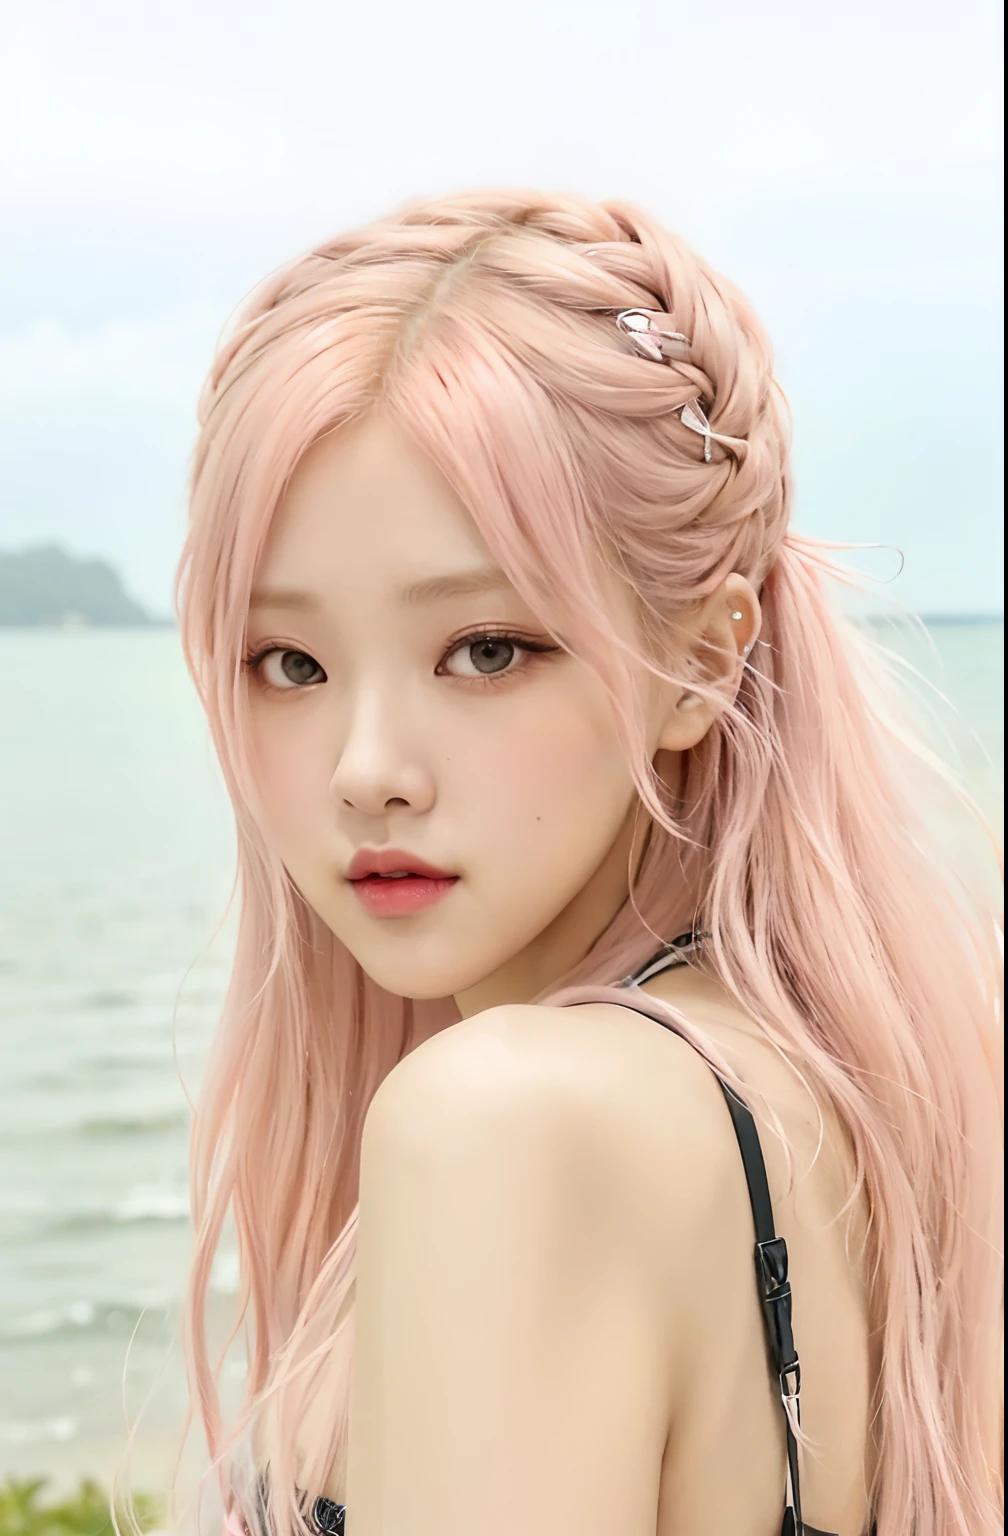 a close up of a woman with long pink hair near a body of water, roseanne park of blackpink, portrait of jossi of blackpink, jossi of blackpink, portrait jisoo blackpink, jisoo of blackpink, jisoo from blackpink, jia, jinyoung shin, portrait of female korean idol, bae suzy, sun yunjoo, with pink hair, blackpink, glowing peach face